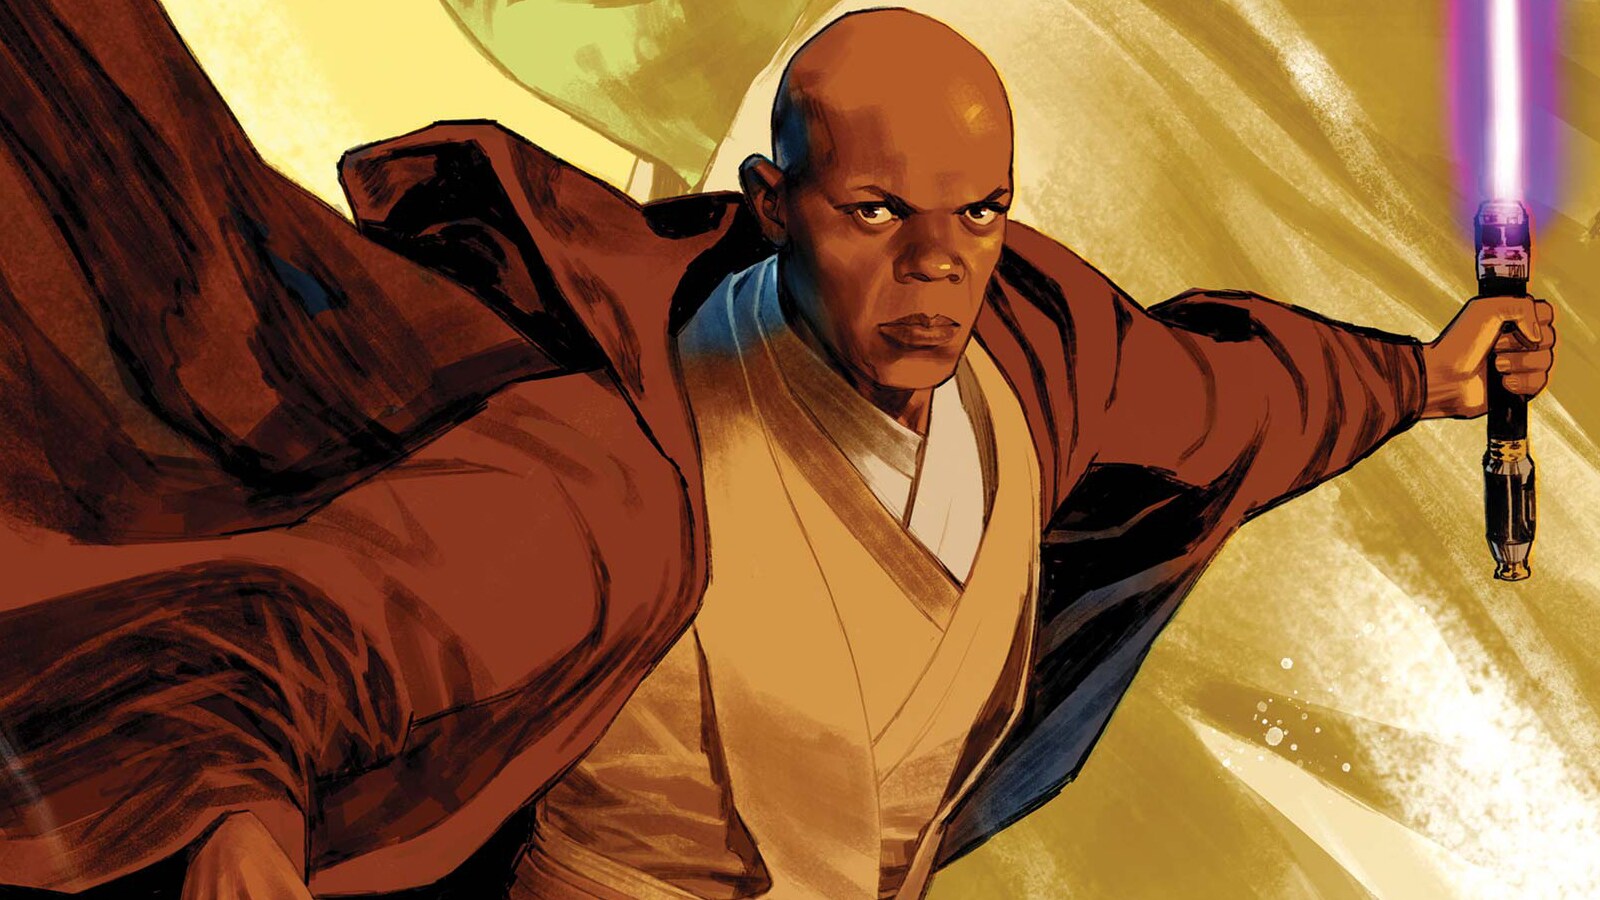 Marvel’s Mace Windu #1 Showcases the Prequel Hero in an Early Adventure – Exclusive Preview